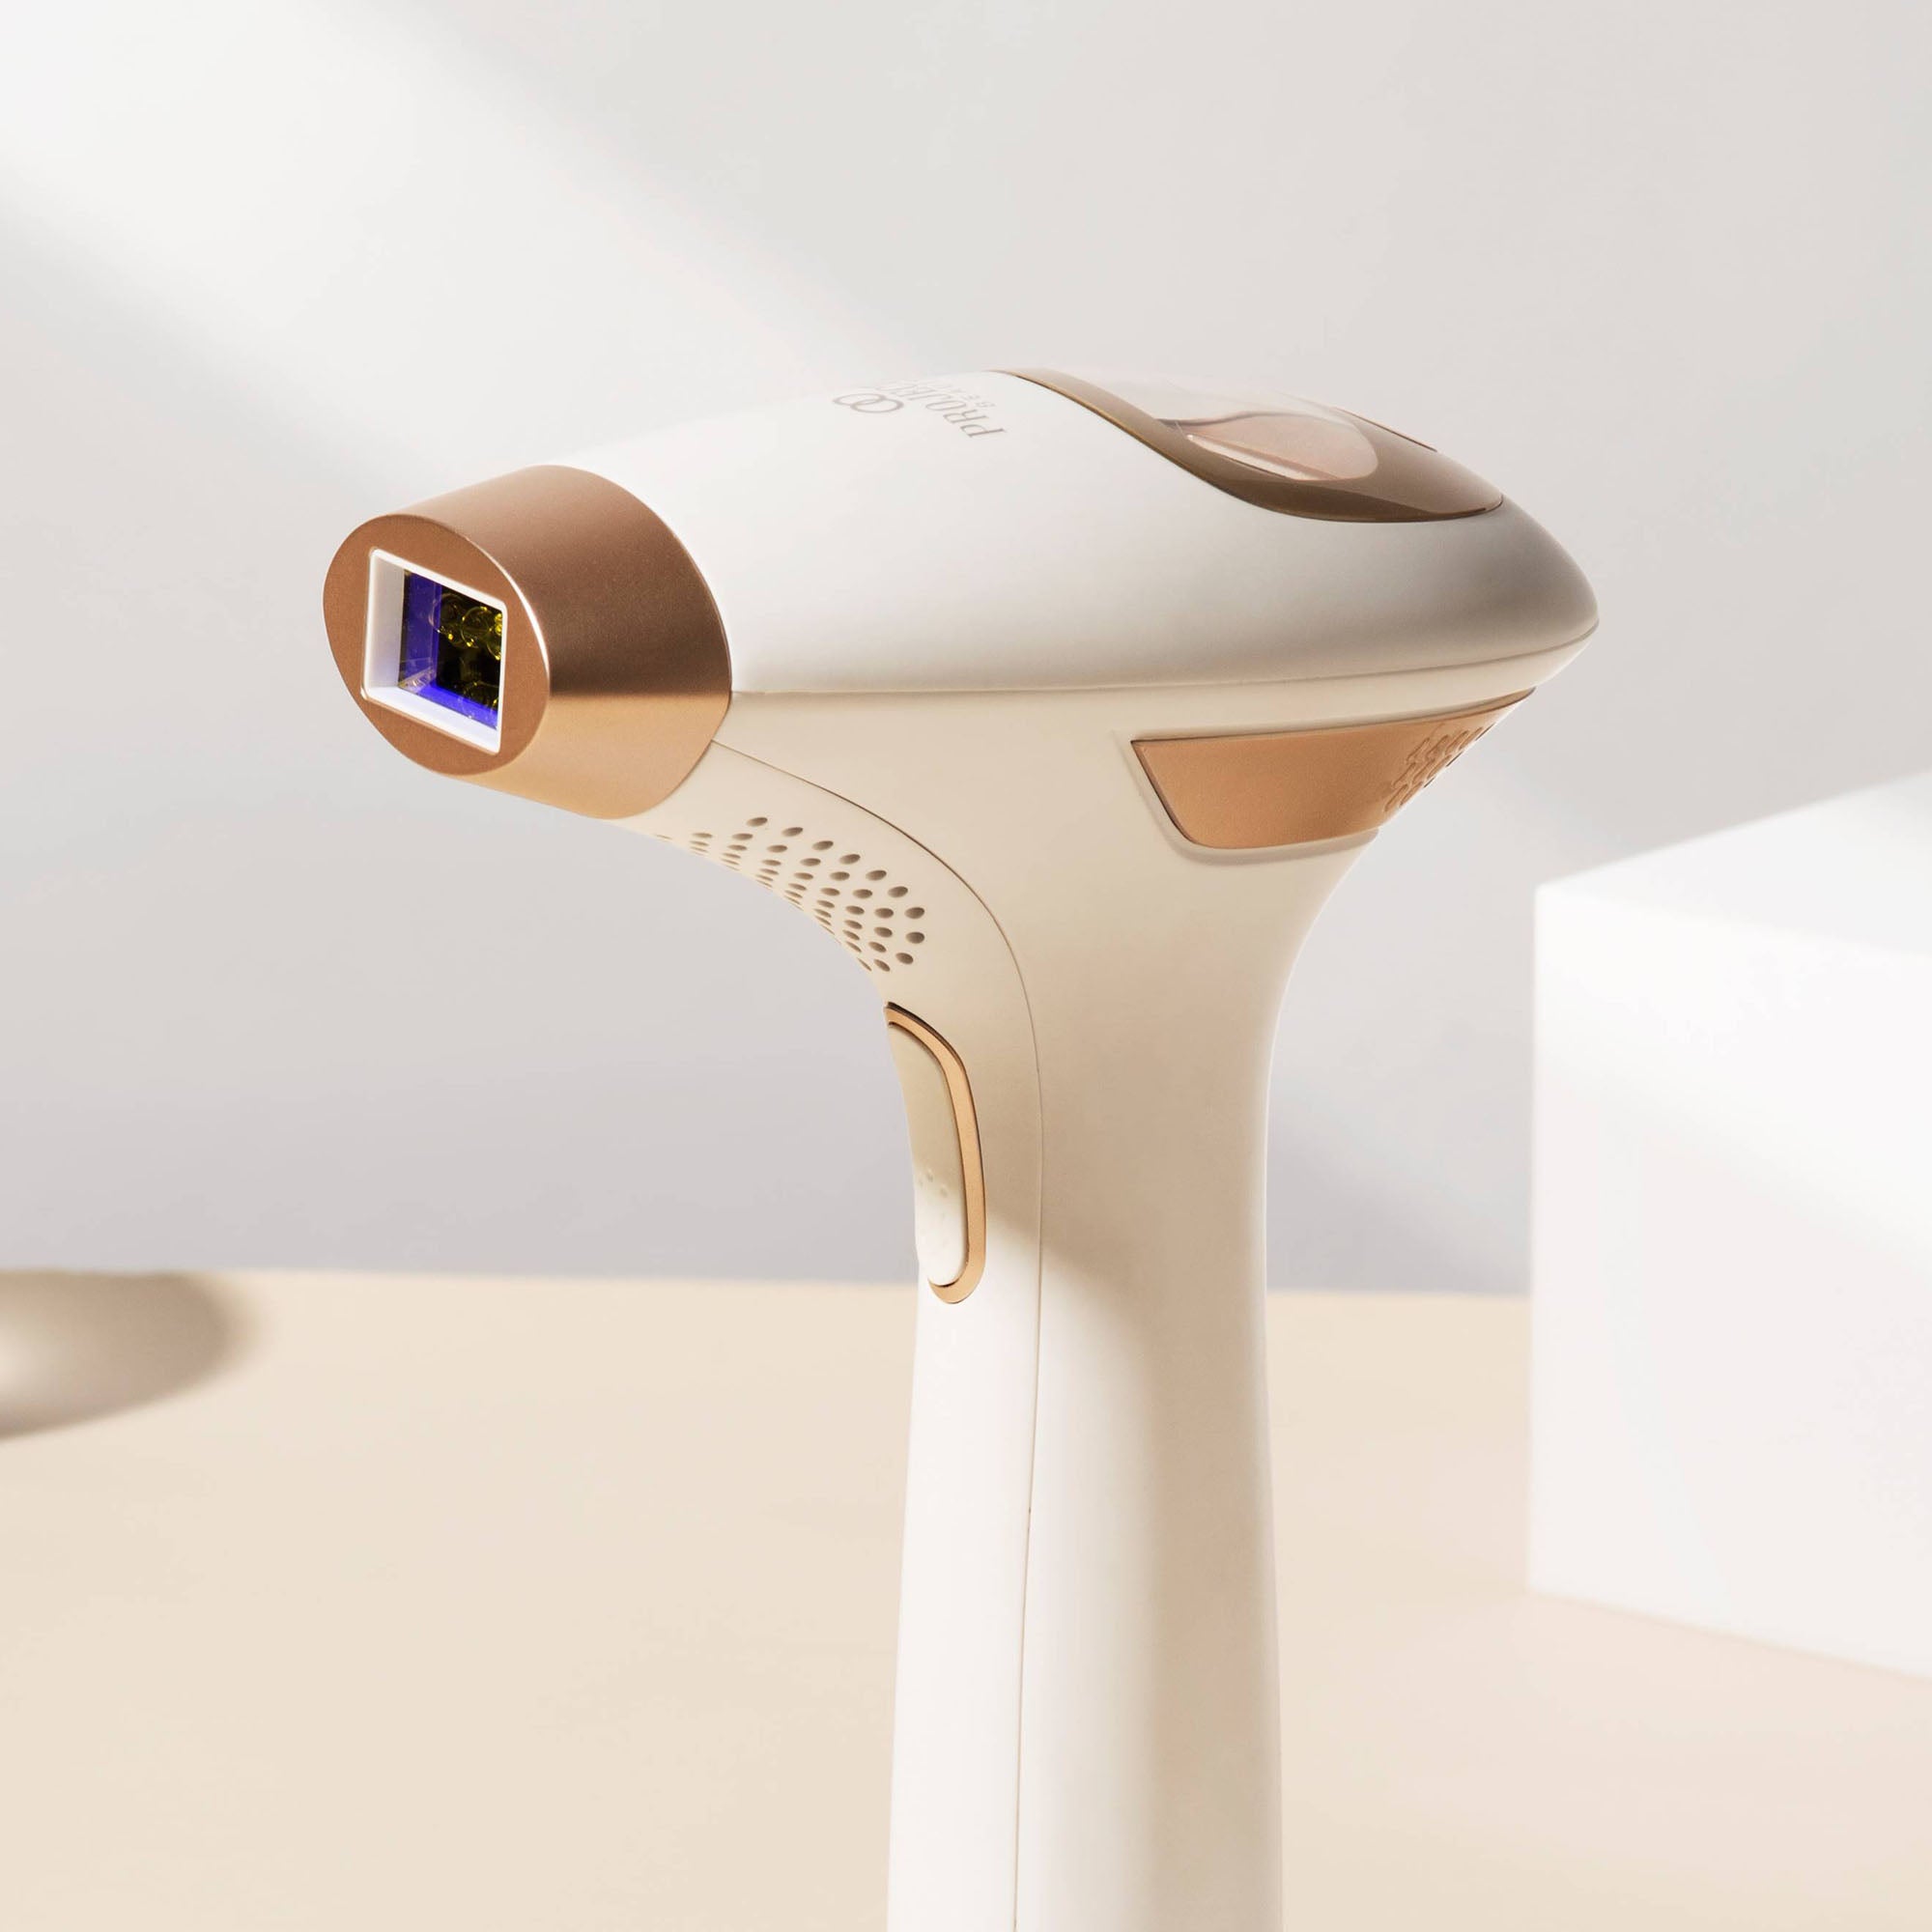 SmoothPro+ | IPL Hair Removal Device - Project E Beauty